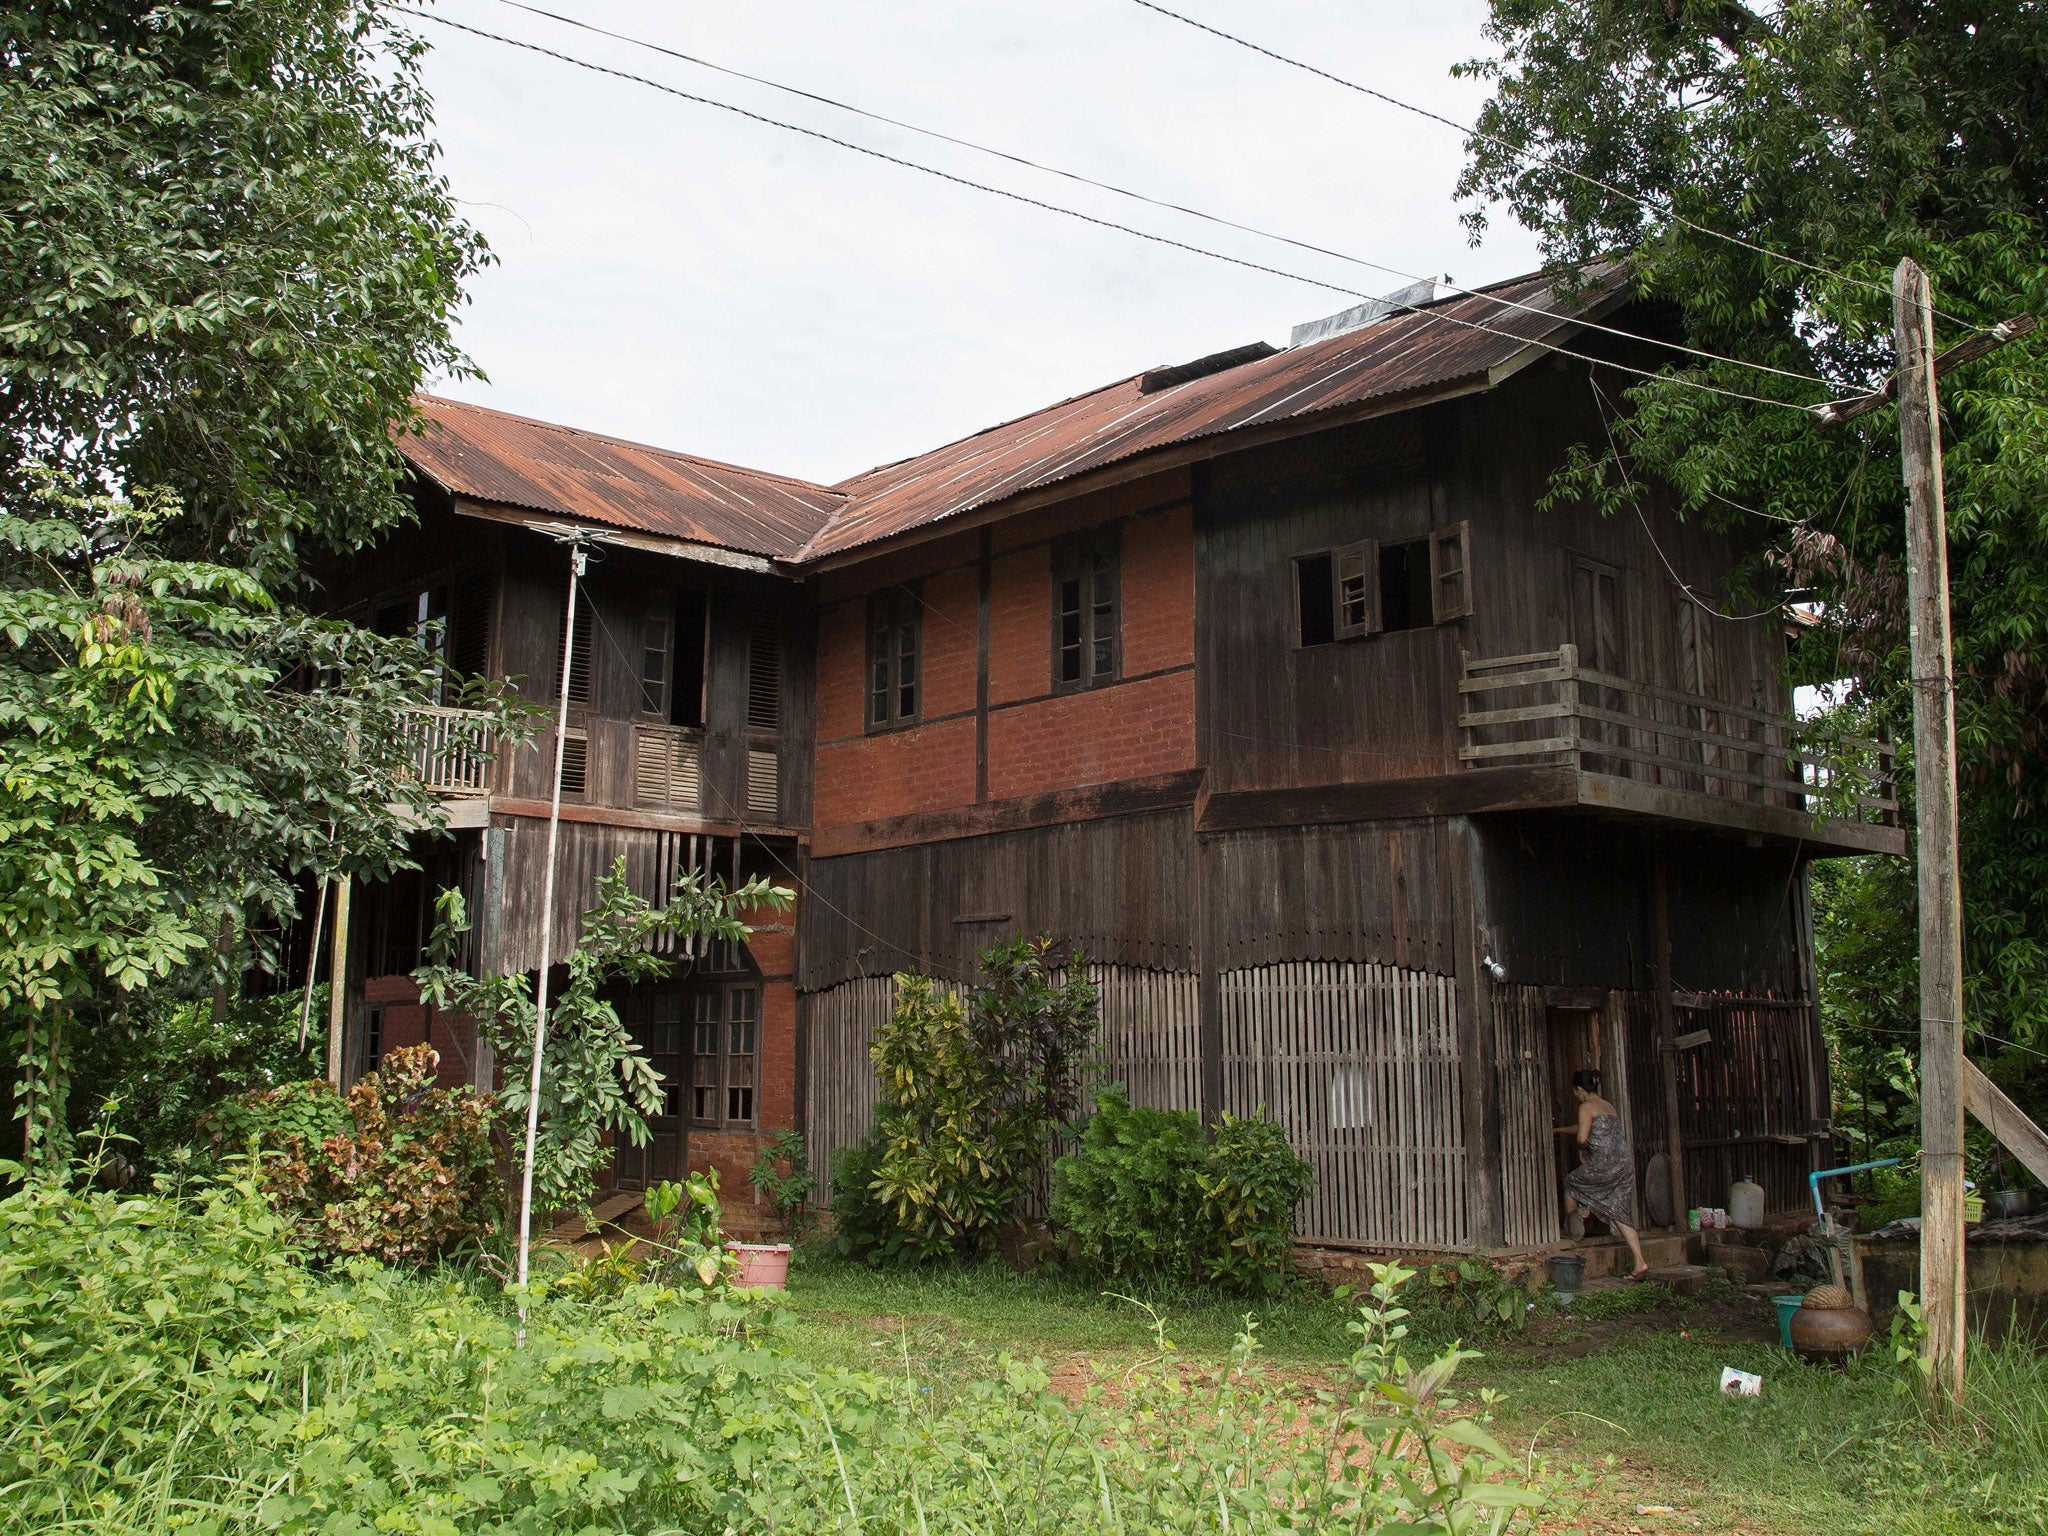 The house where British writer George Orwell is thought to have lived in the 1920s in Katha, Burma